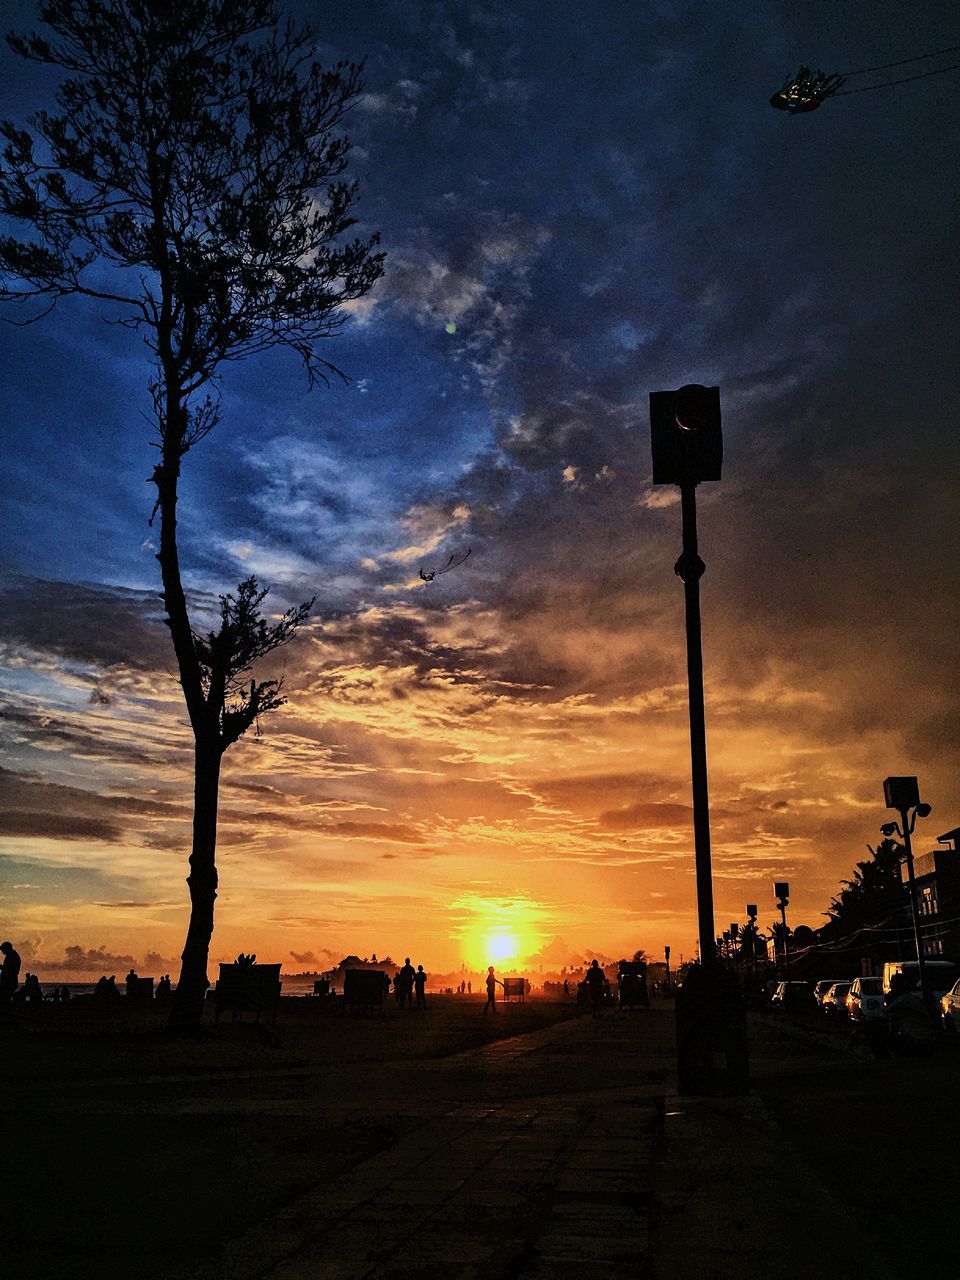 sky, sunset, dawn, silhouette, evening, cloud, afterglow, horizon, nature, tree, sun, beauty in nature, plant, scenics - nature, orange color, tranquility, street, sunlight, tranquil scene, outdoors, street light, dramatic sky, no people, architecture, darkness, idyllic, transportation, road, landscape